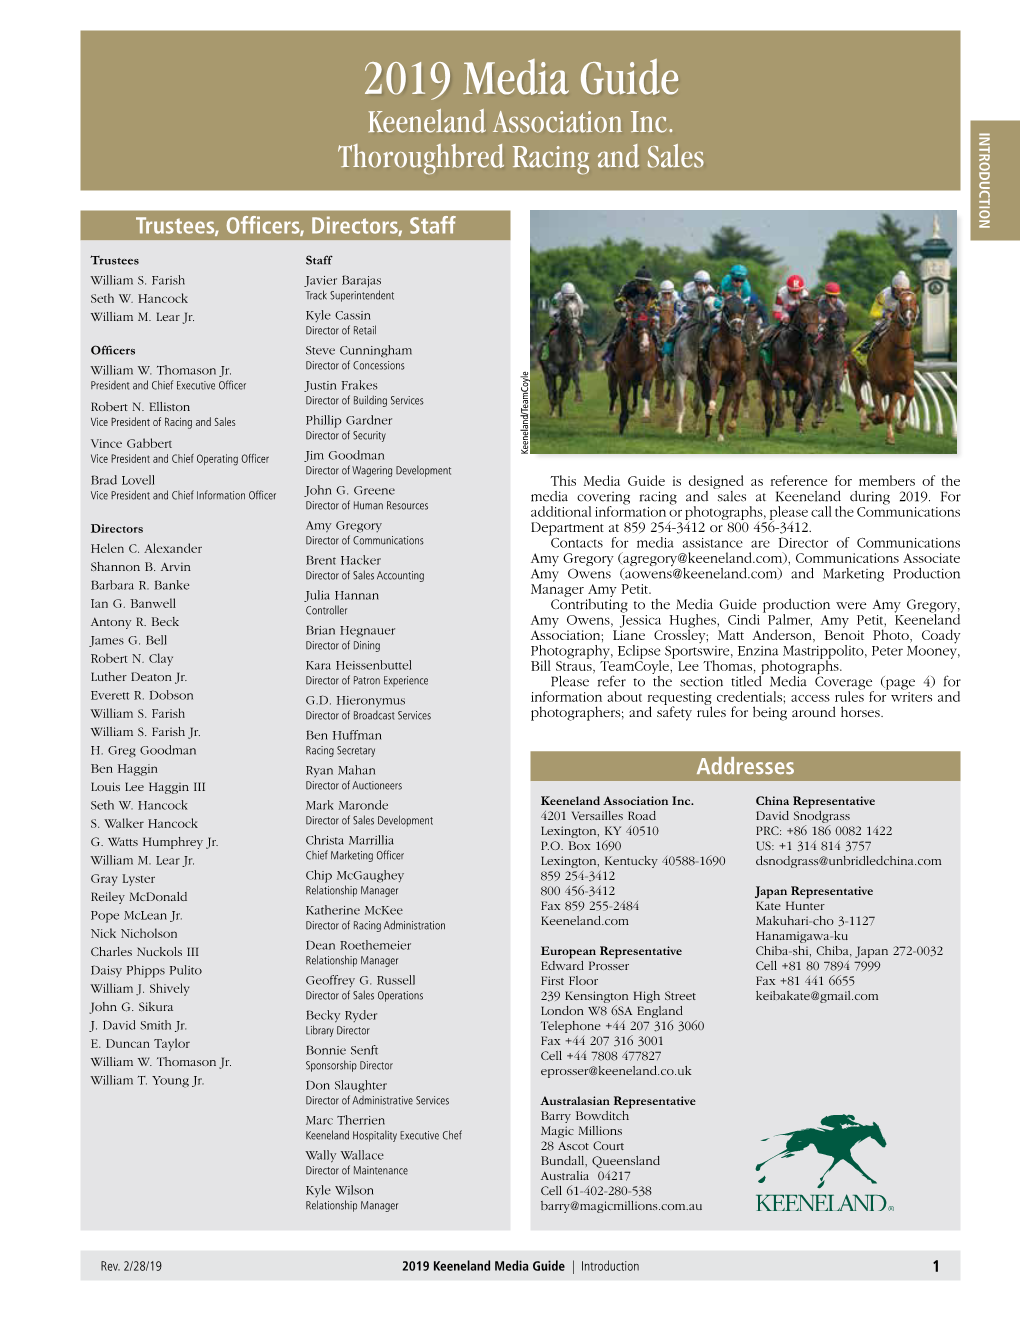 2019 Media Guide Media 2019 Thoroughbred Racing and Sales Racing Thoroughbred Kyle Wilson Relationship Manager Dean Roethemeier Relationship Manager Geoffrey G